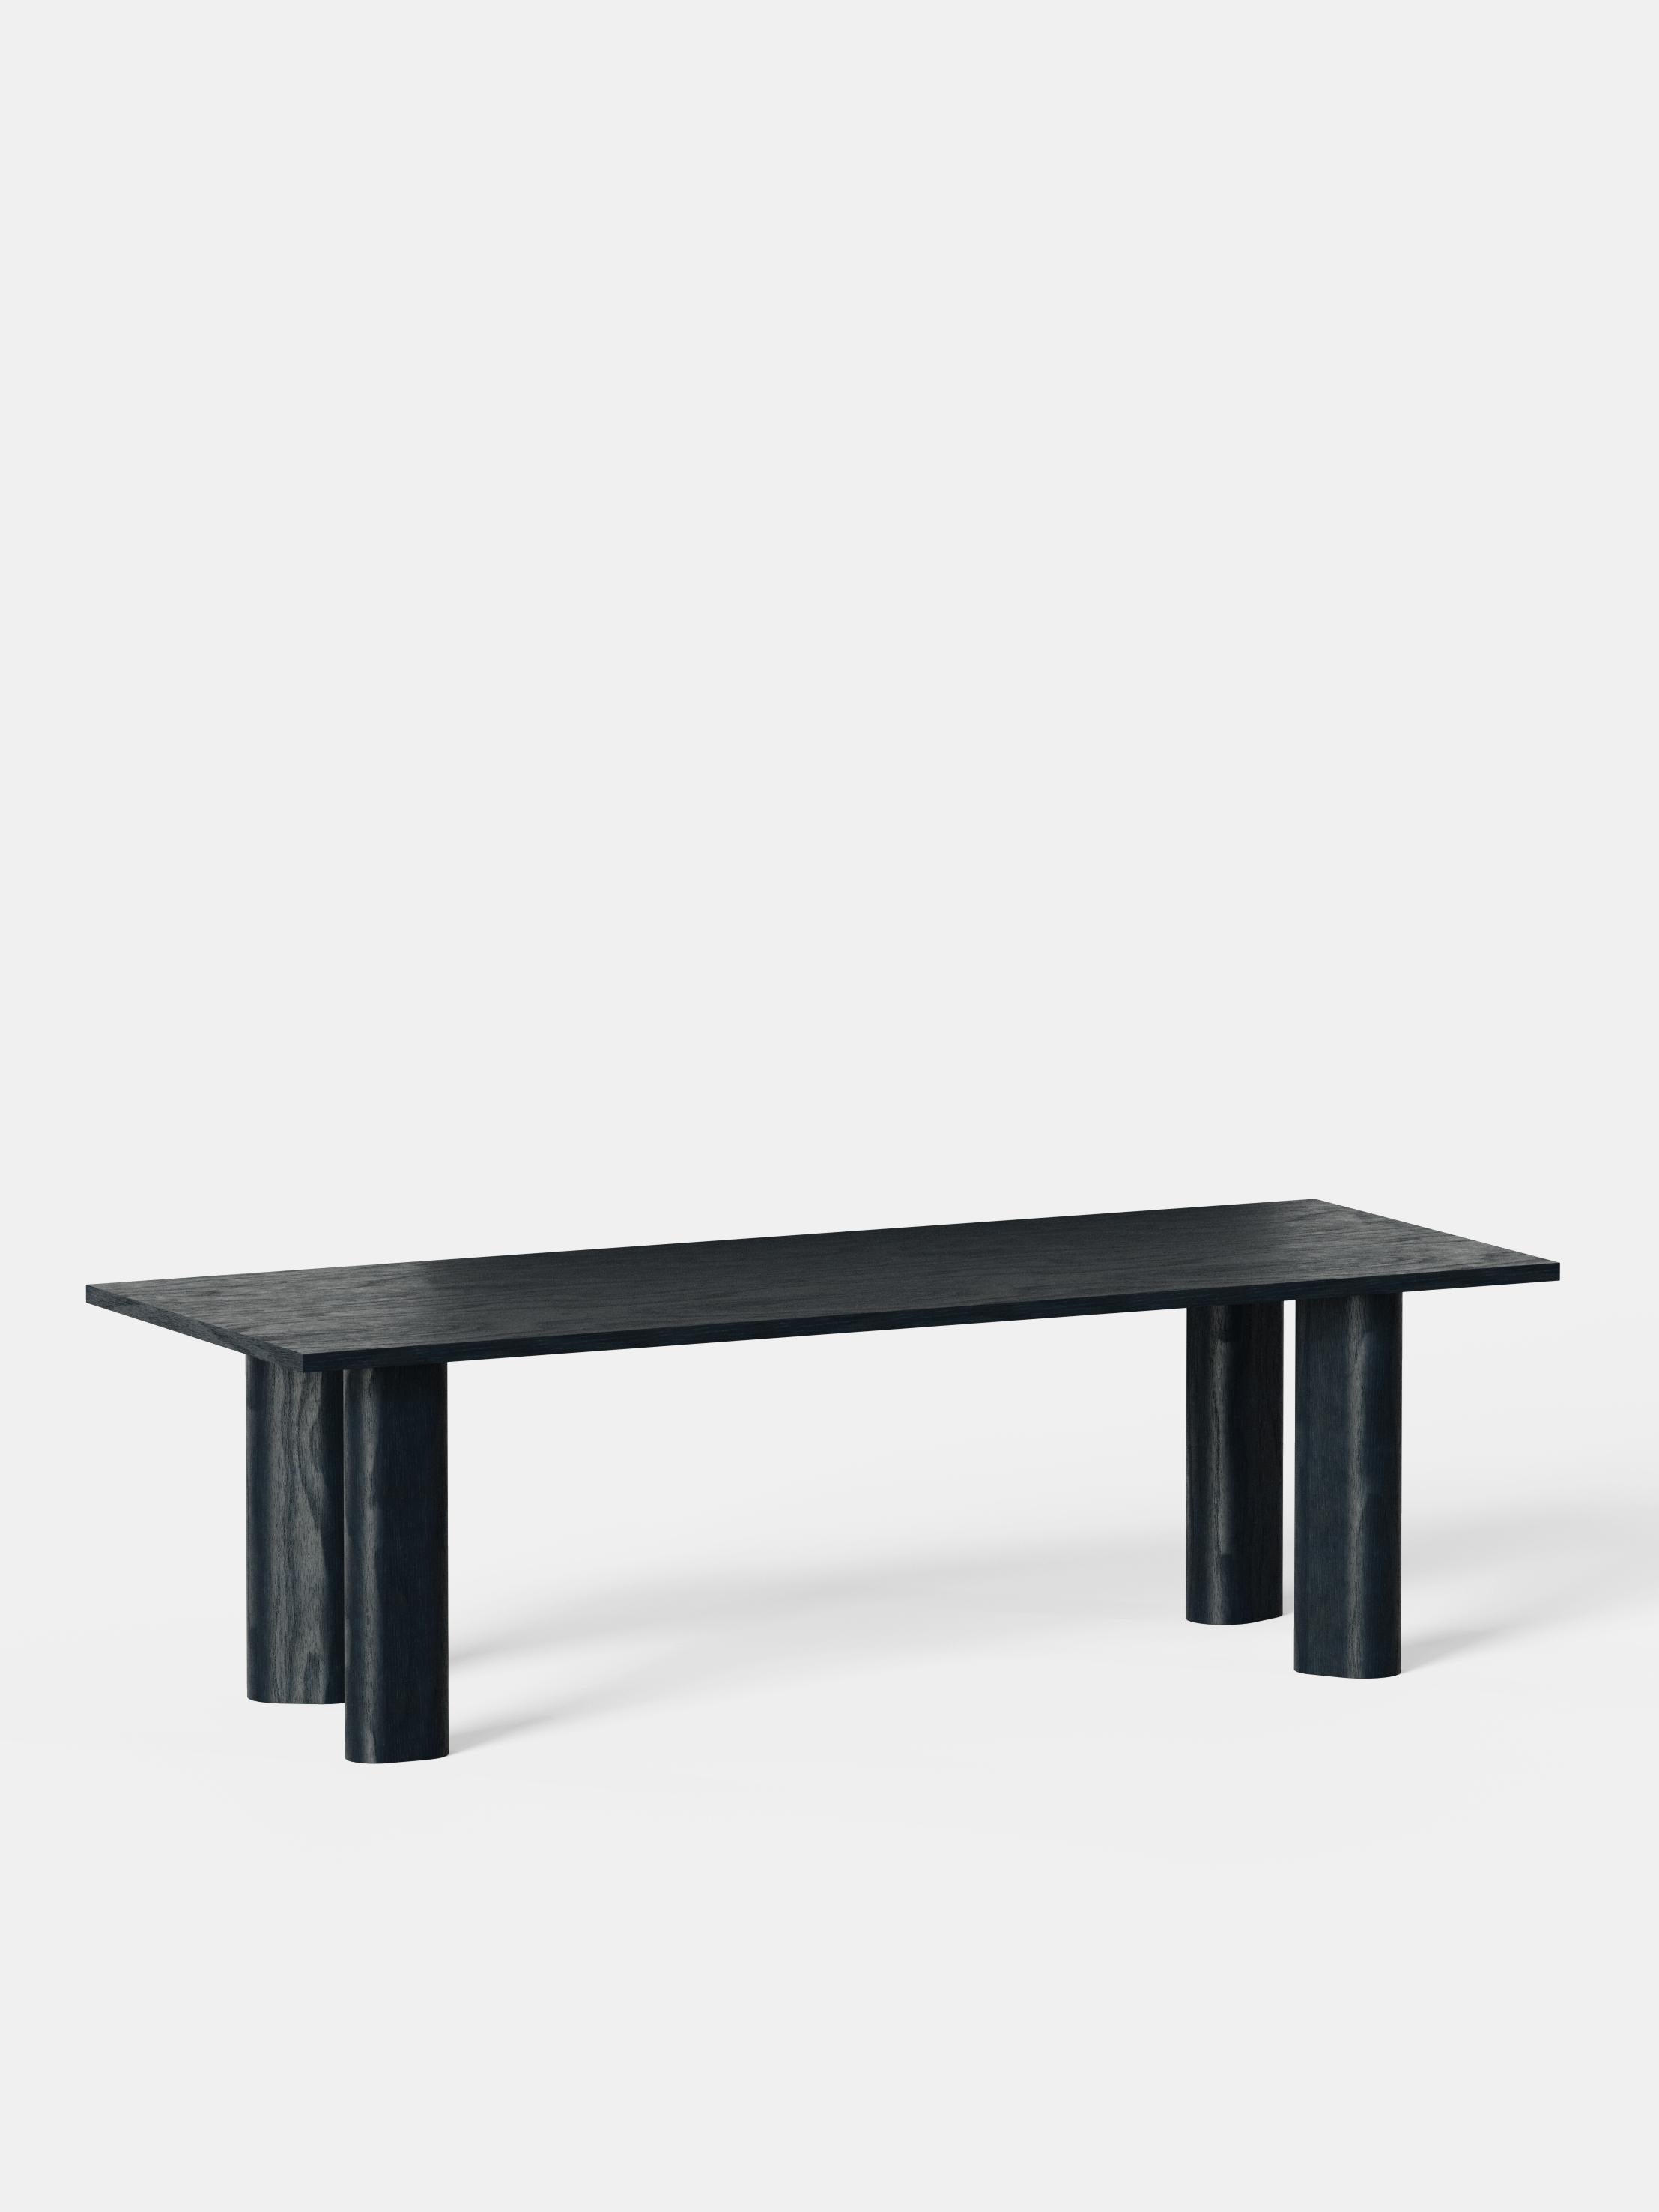 Galta Forte 240 Black Oak Dining Table by Kann Design
Dimensions: D 90 x W 240 x H 72 cm.
Materials: Black lacquered oak.

The Galta Forte dining table takes the signature shape of the Galta collection legs and accentuates it. Its proportions are